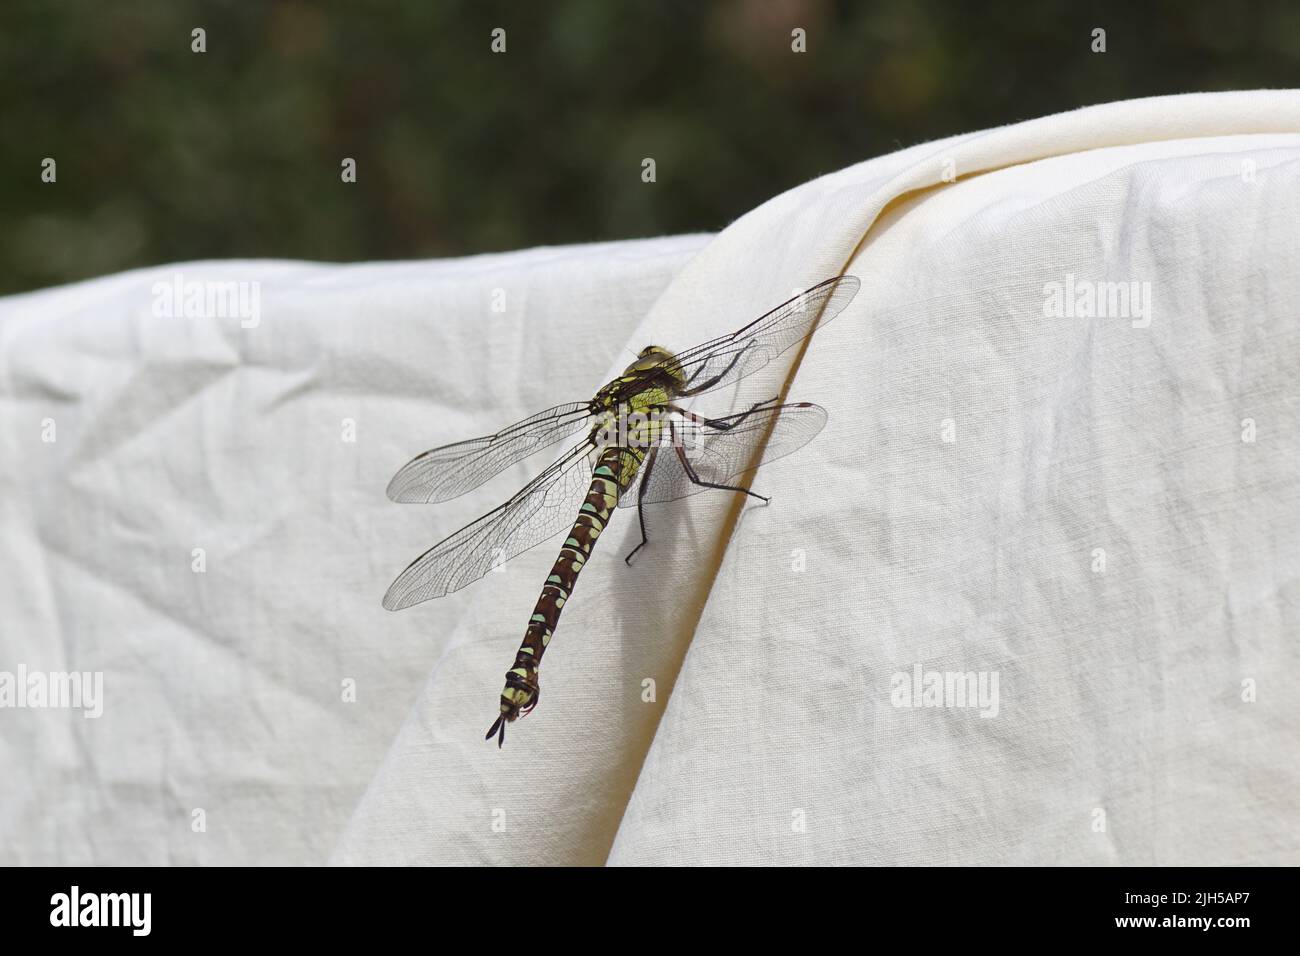 Southern hawker, blue hawker (Aeshna cyanea) or the family hawkers (Aeshnidae), which clings to a sheet on the clothesline. Dutch garden. Summer, July Stock Photo